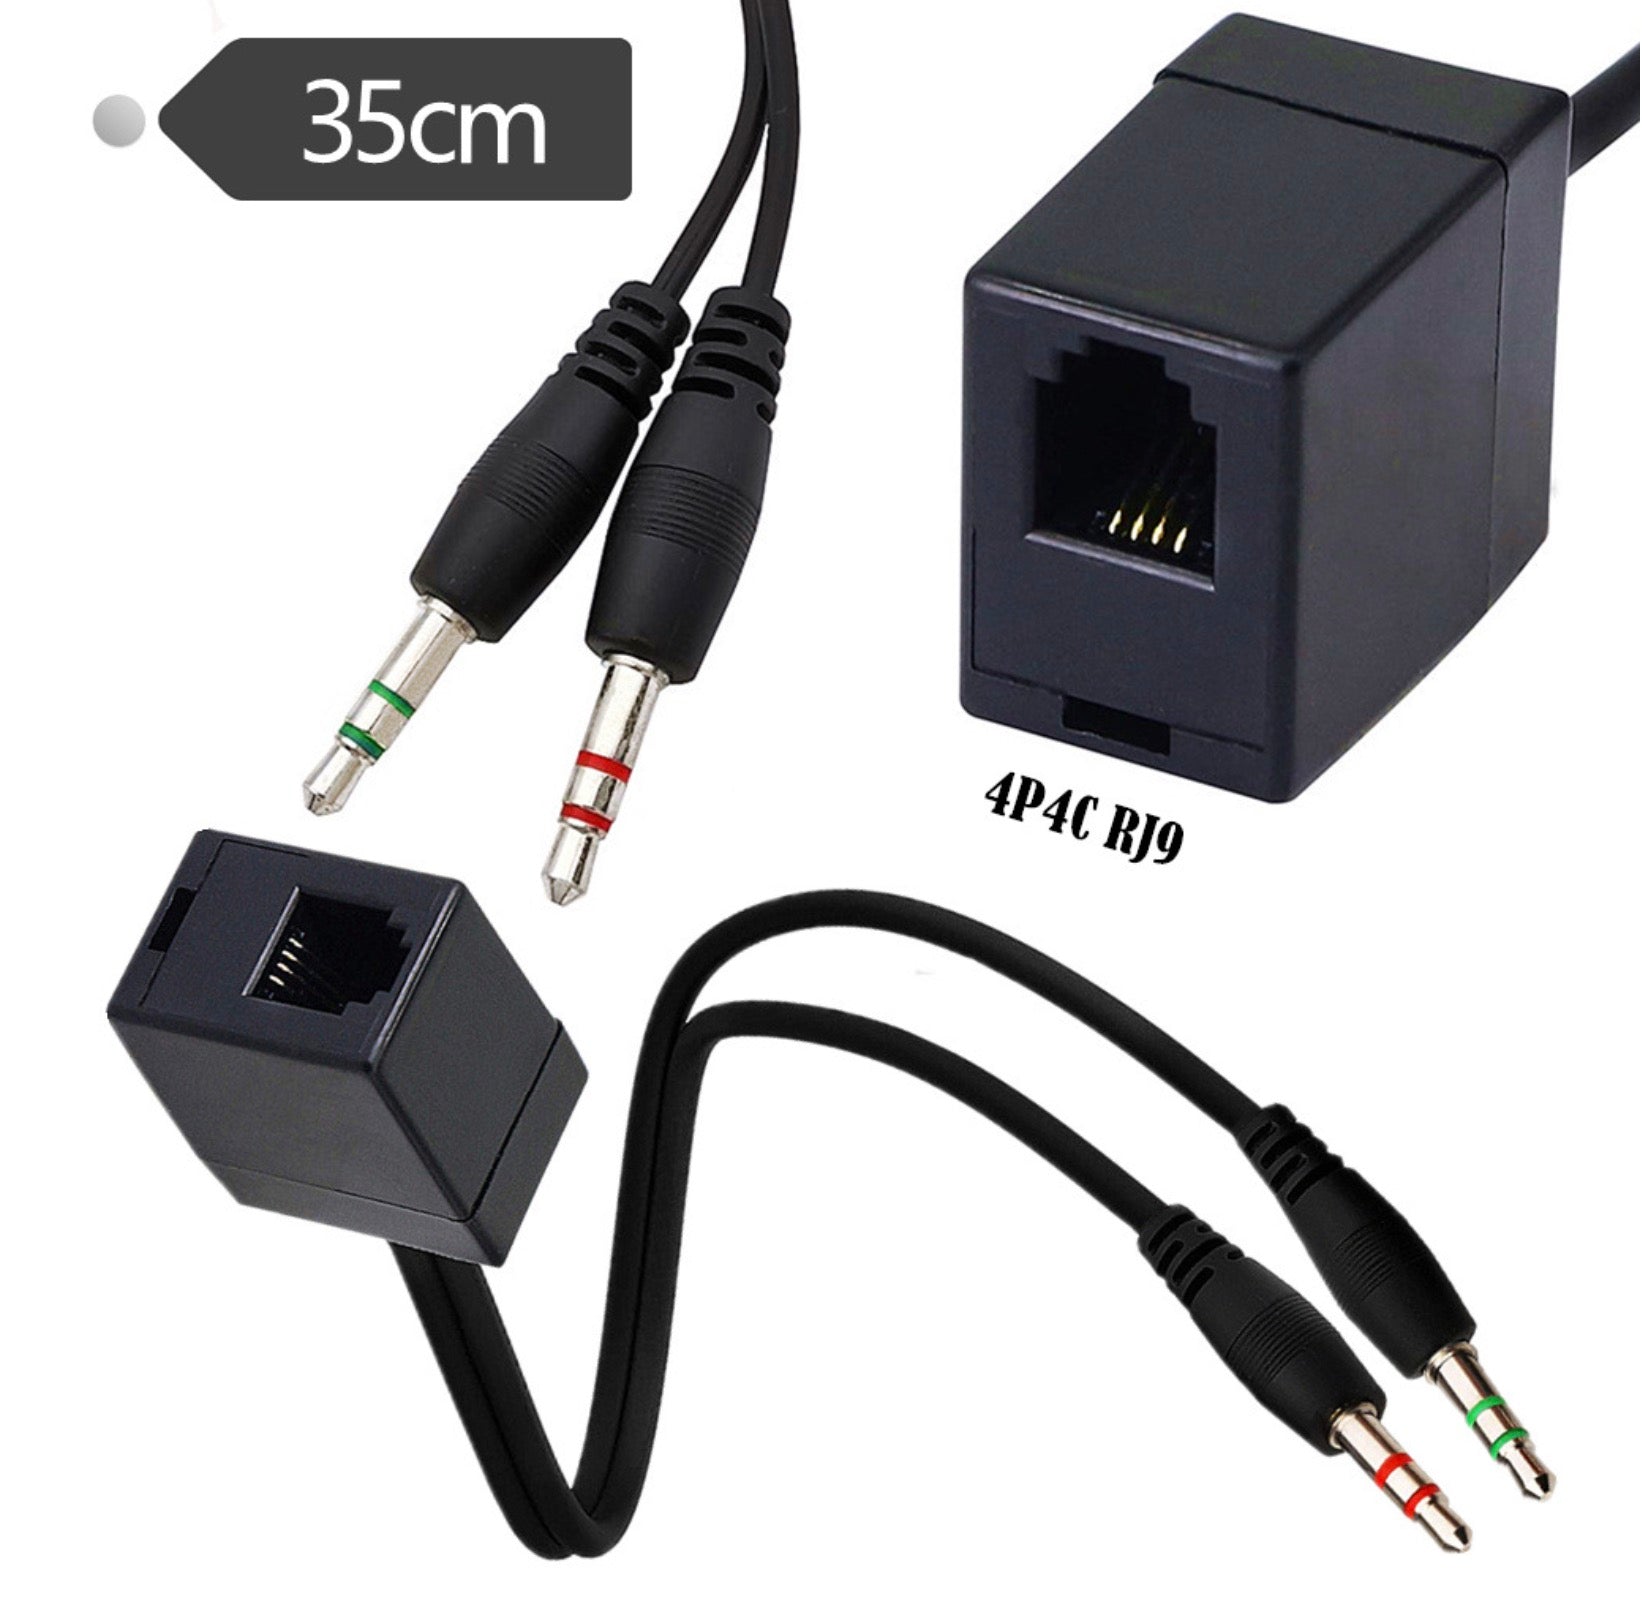 4P4C RJ11 Female to Double 3.5mm Male Y Splitter Cable for VoIP Headsets